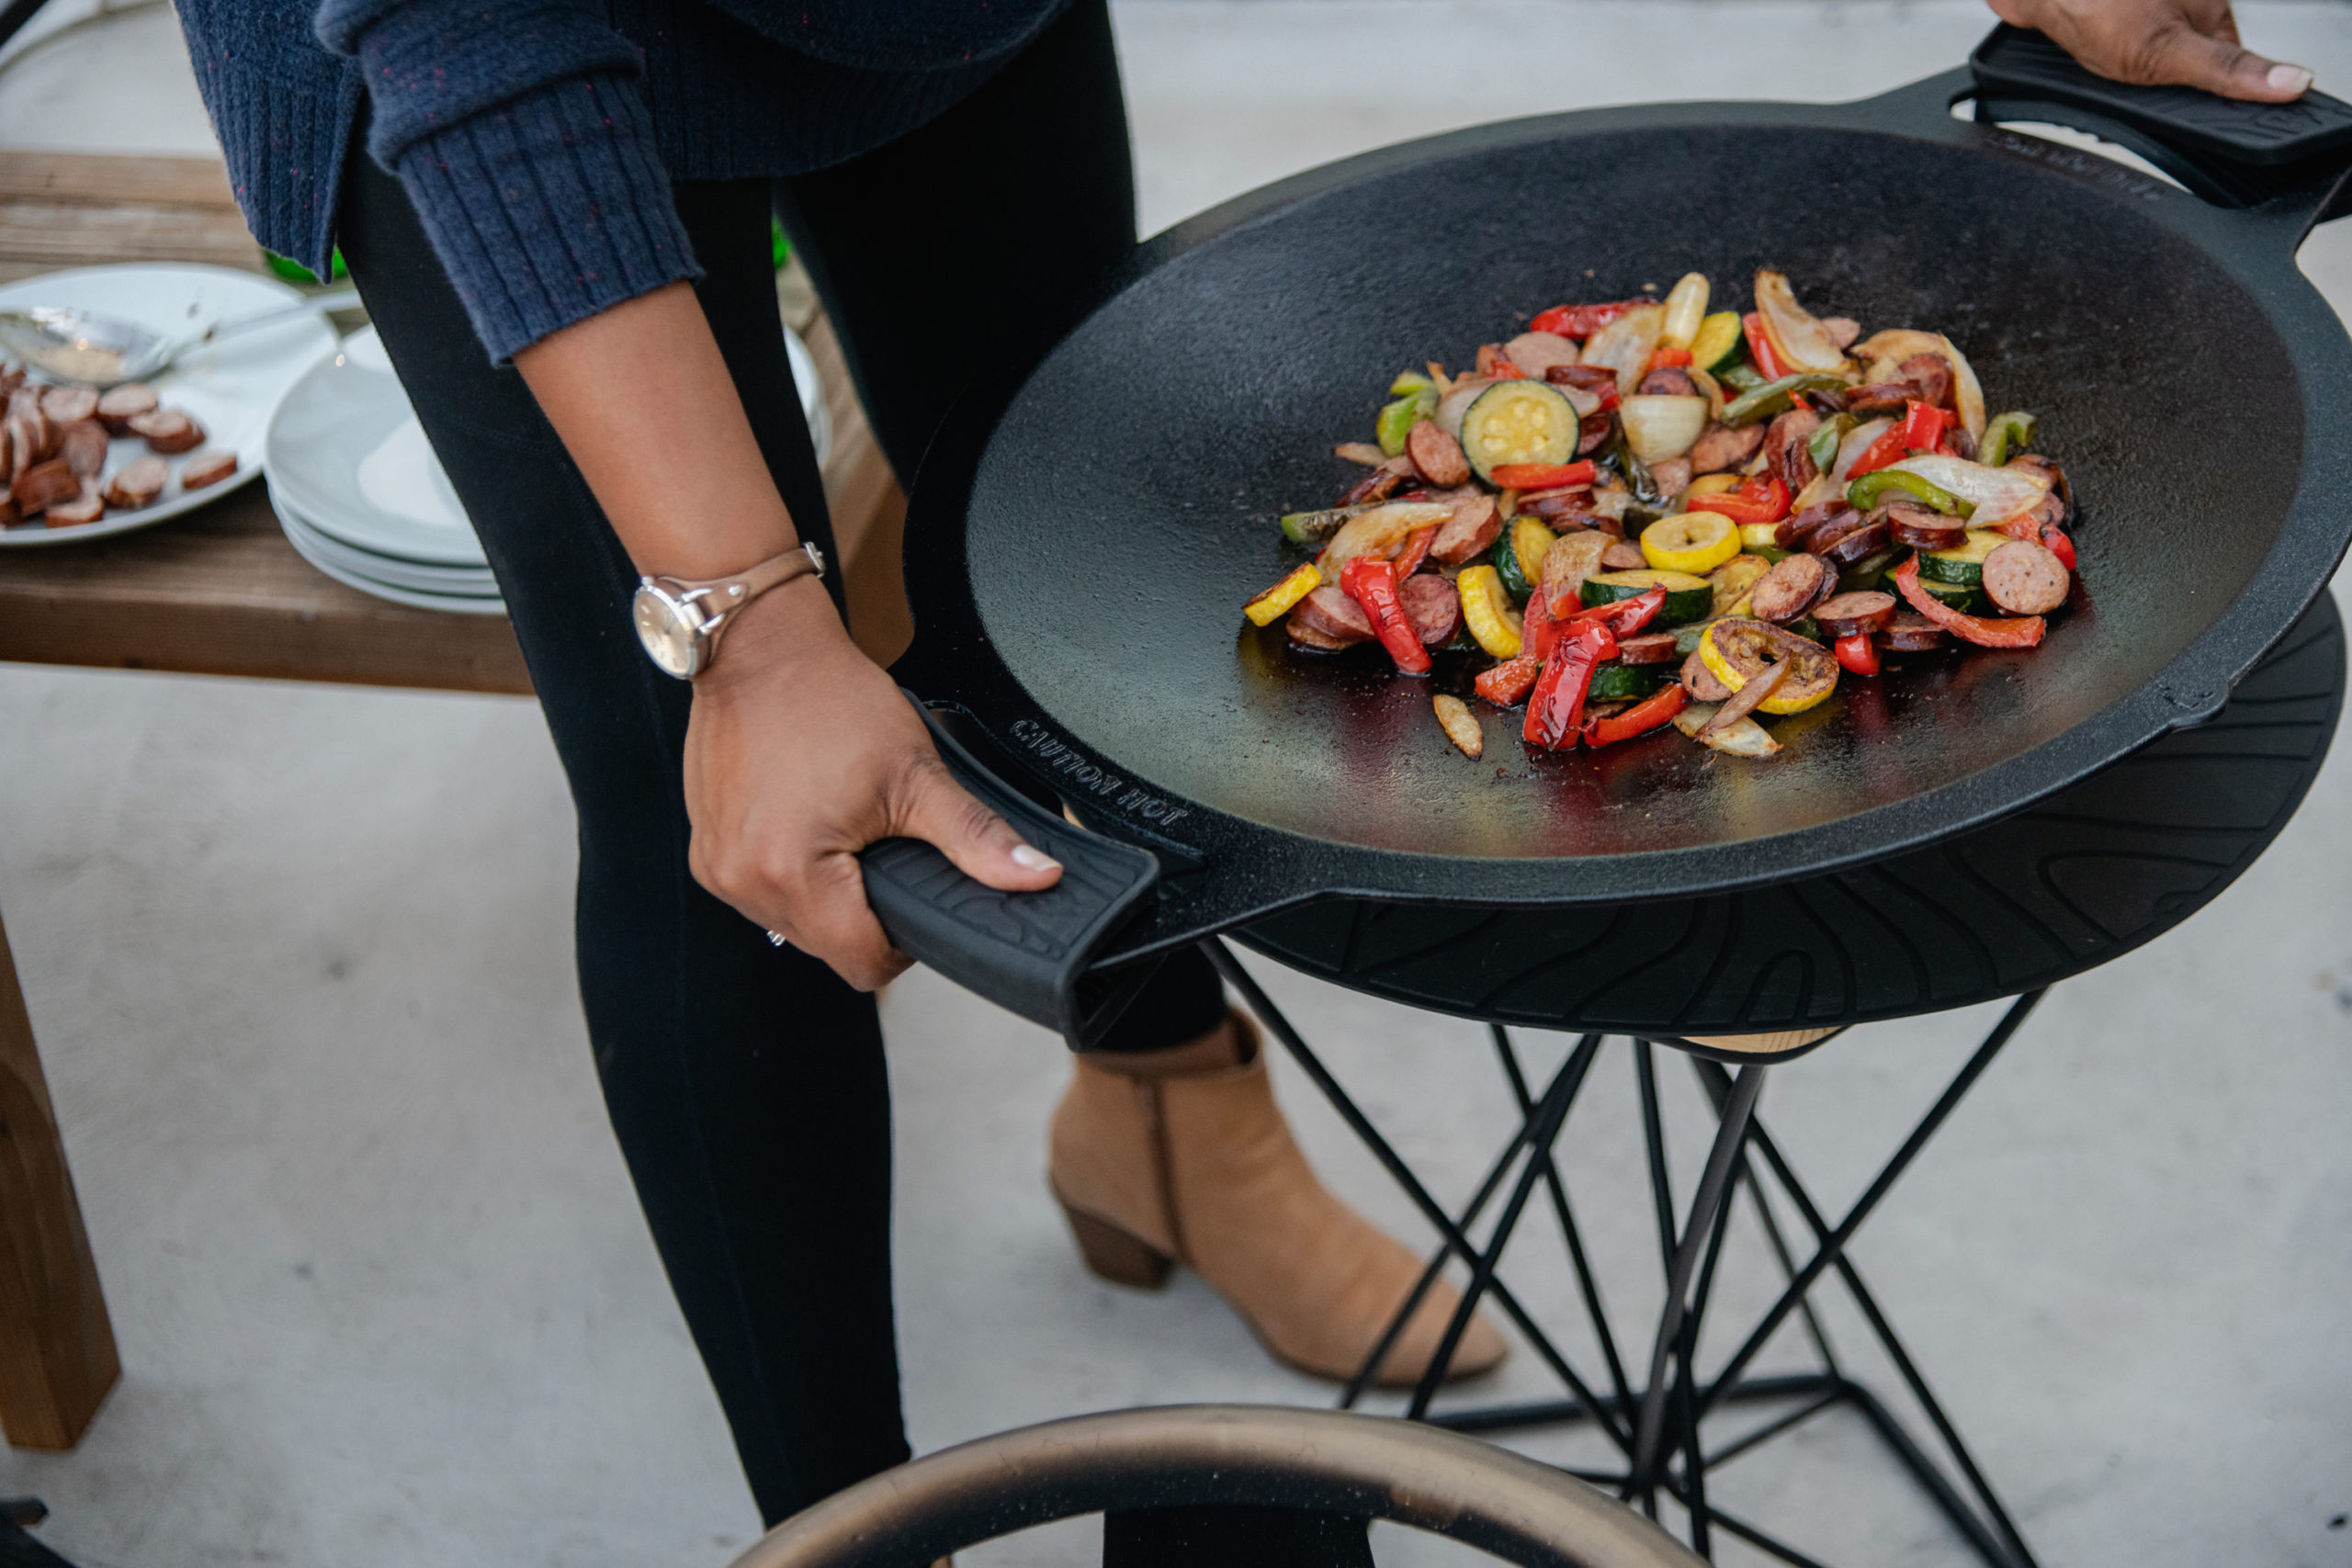 https://blog.solostove.com/wp-content/uploads/2021/11/COOK-TOPS_Griddle-Wok-Lifestyle-101921-26-3000px-scaled.jpg